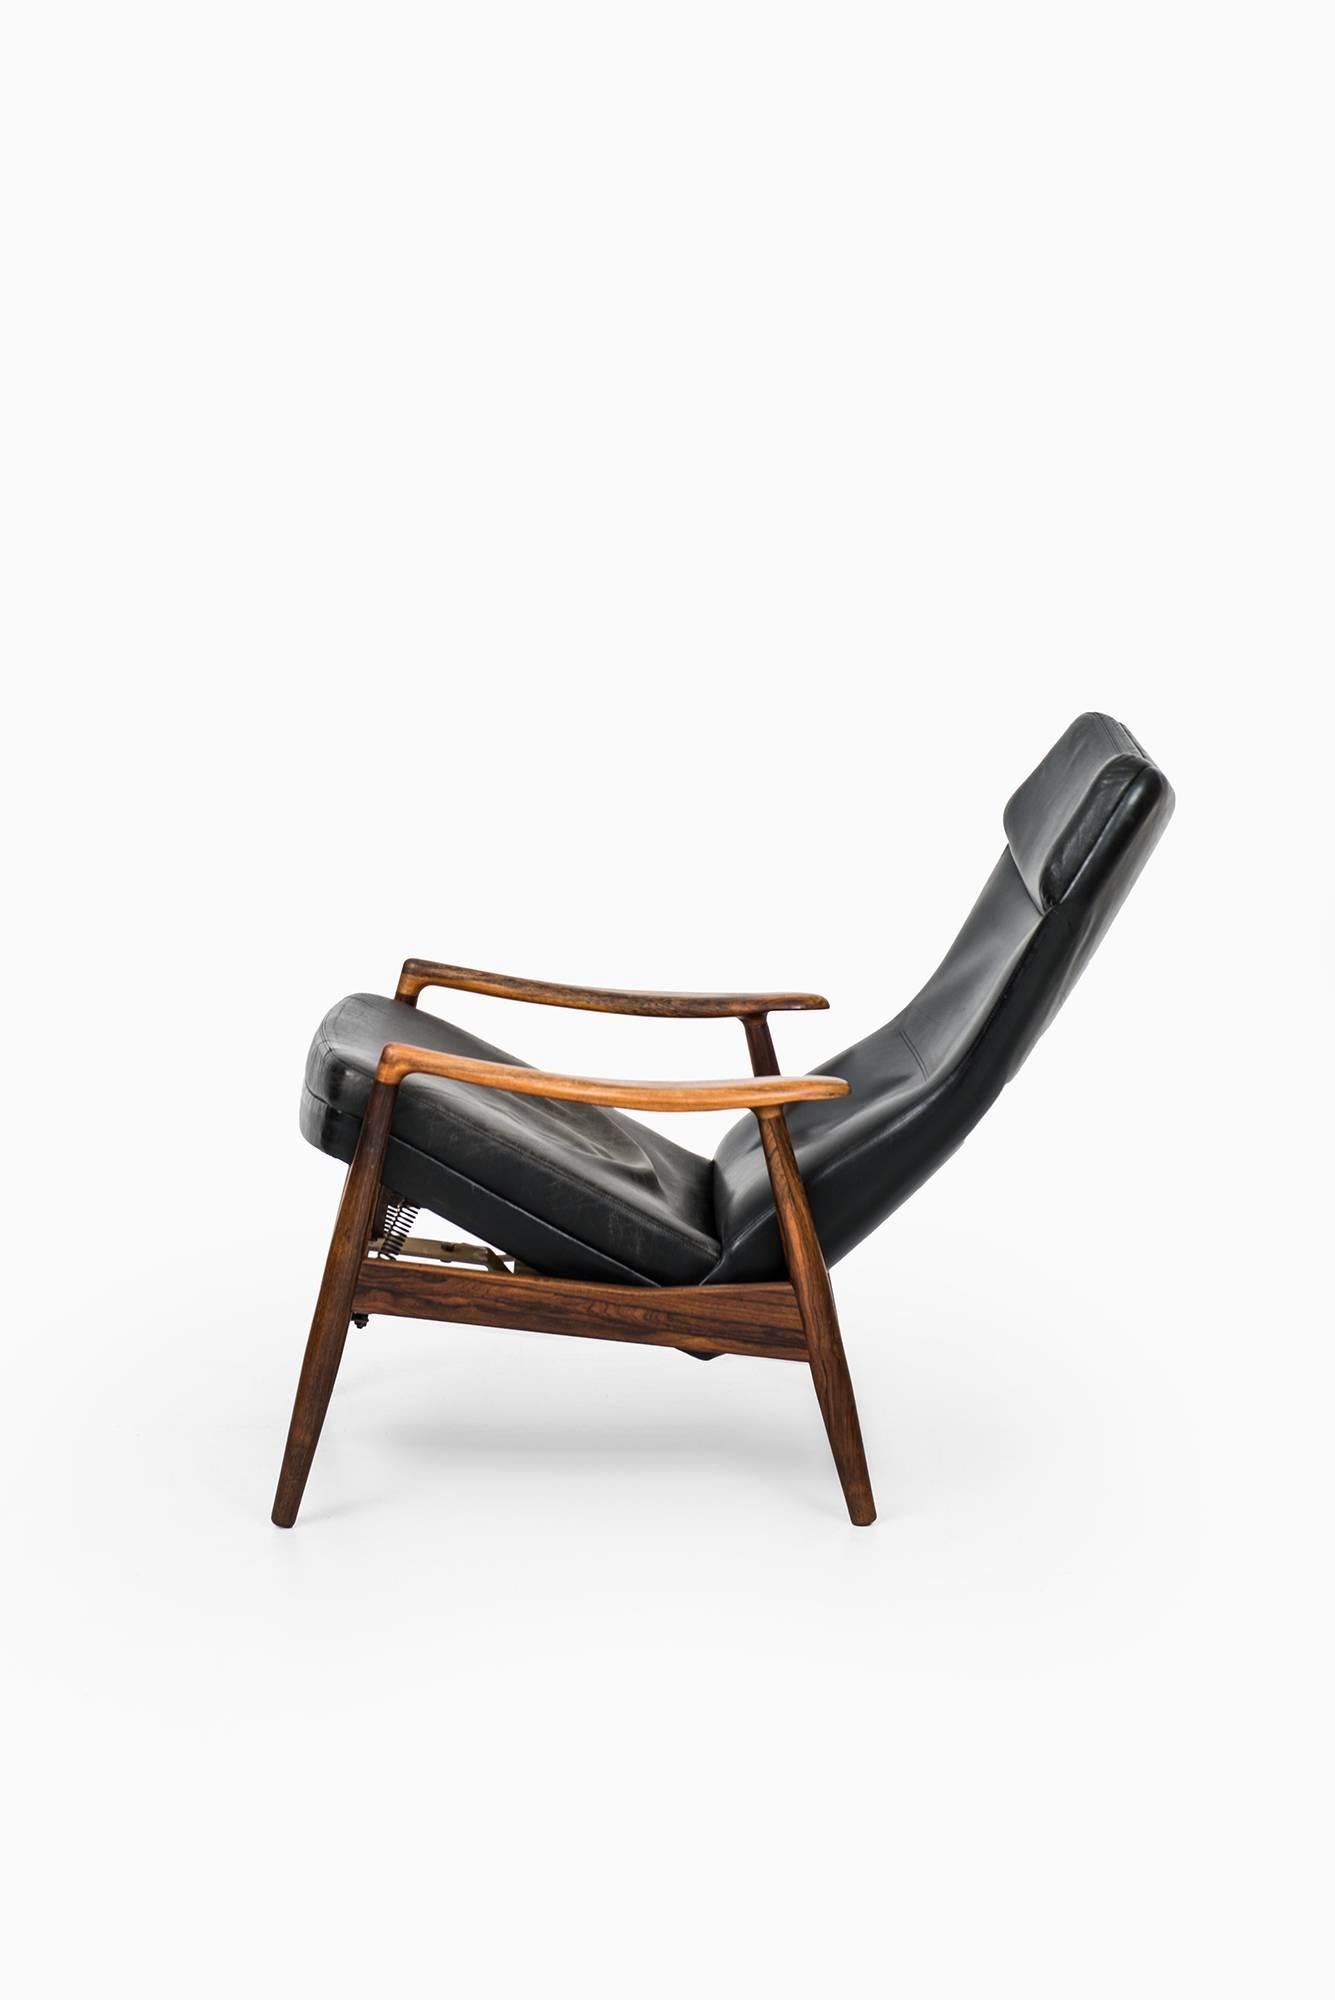 Very rare rocking or reclining chair model PD-21 designed by Ib Kofod-Larsen. Produced by cabinet master Povl Dinesen in Denmark.